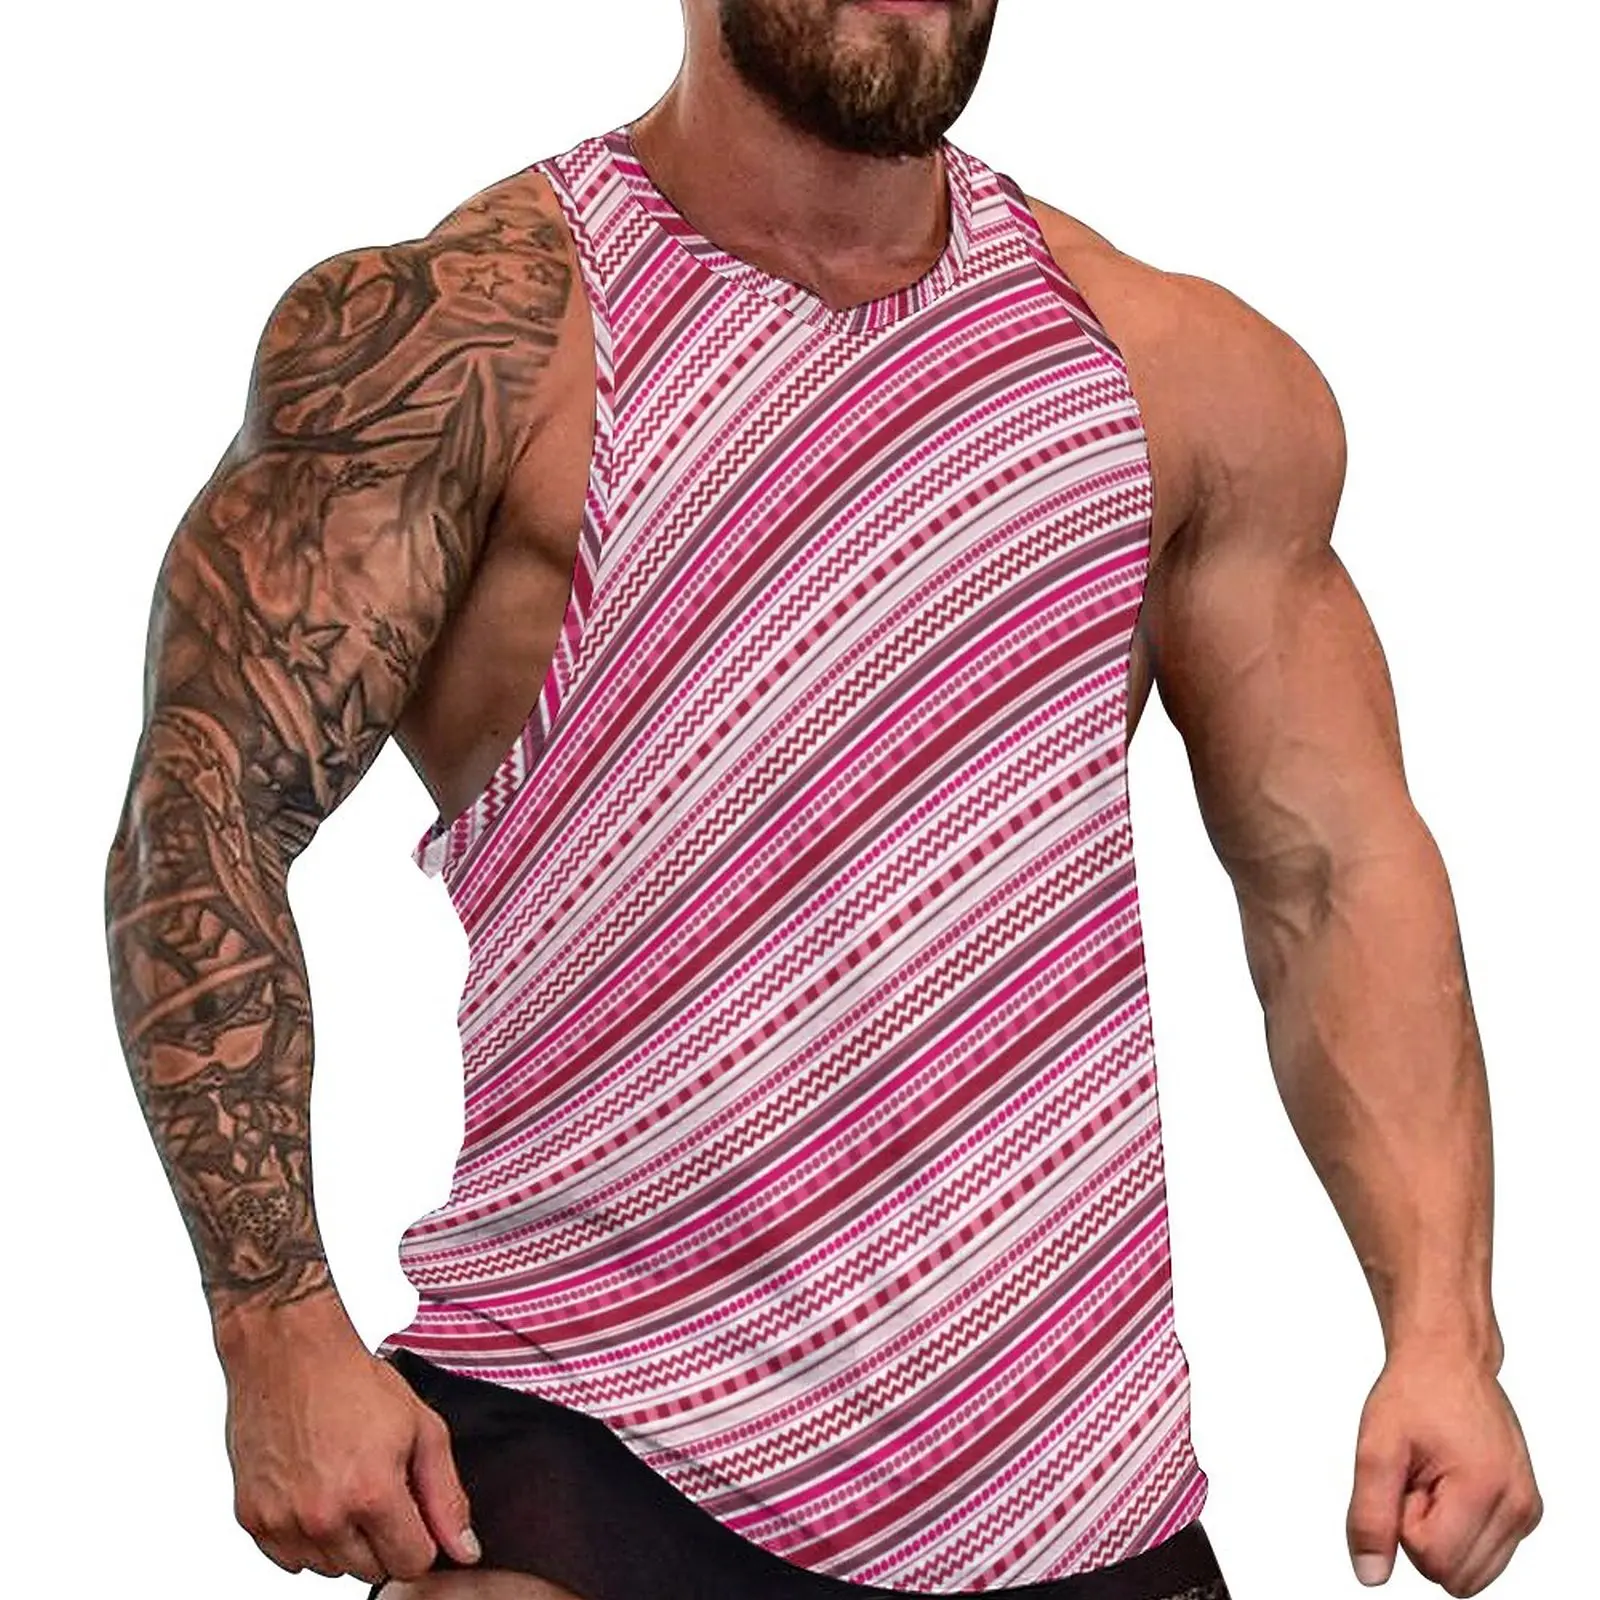 

Pink Dots And Stripes Tank Top Male Funky Shades Print Gym Oversized Tops Summer Fashion Custom Sleeveless Vests